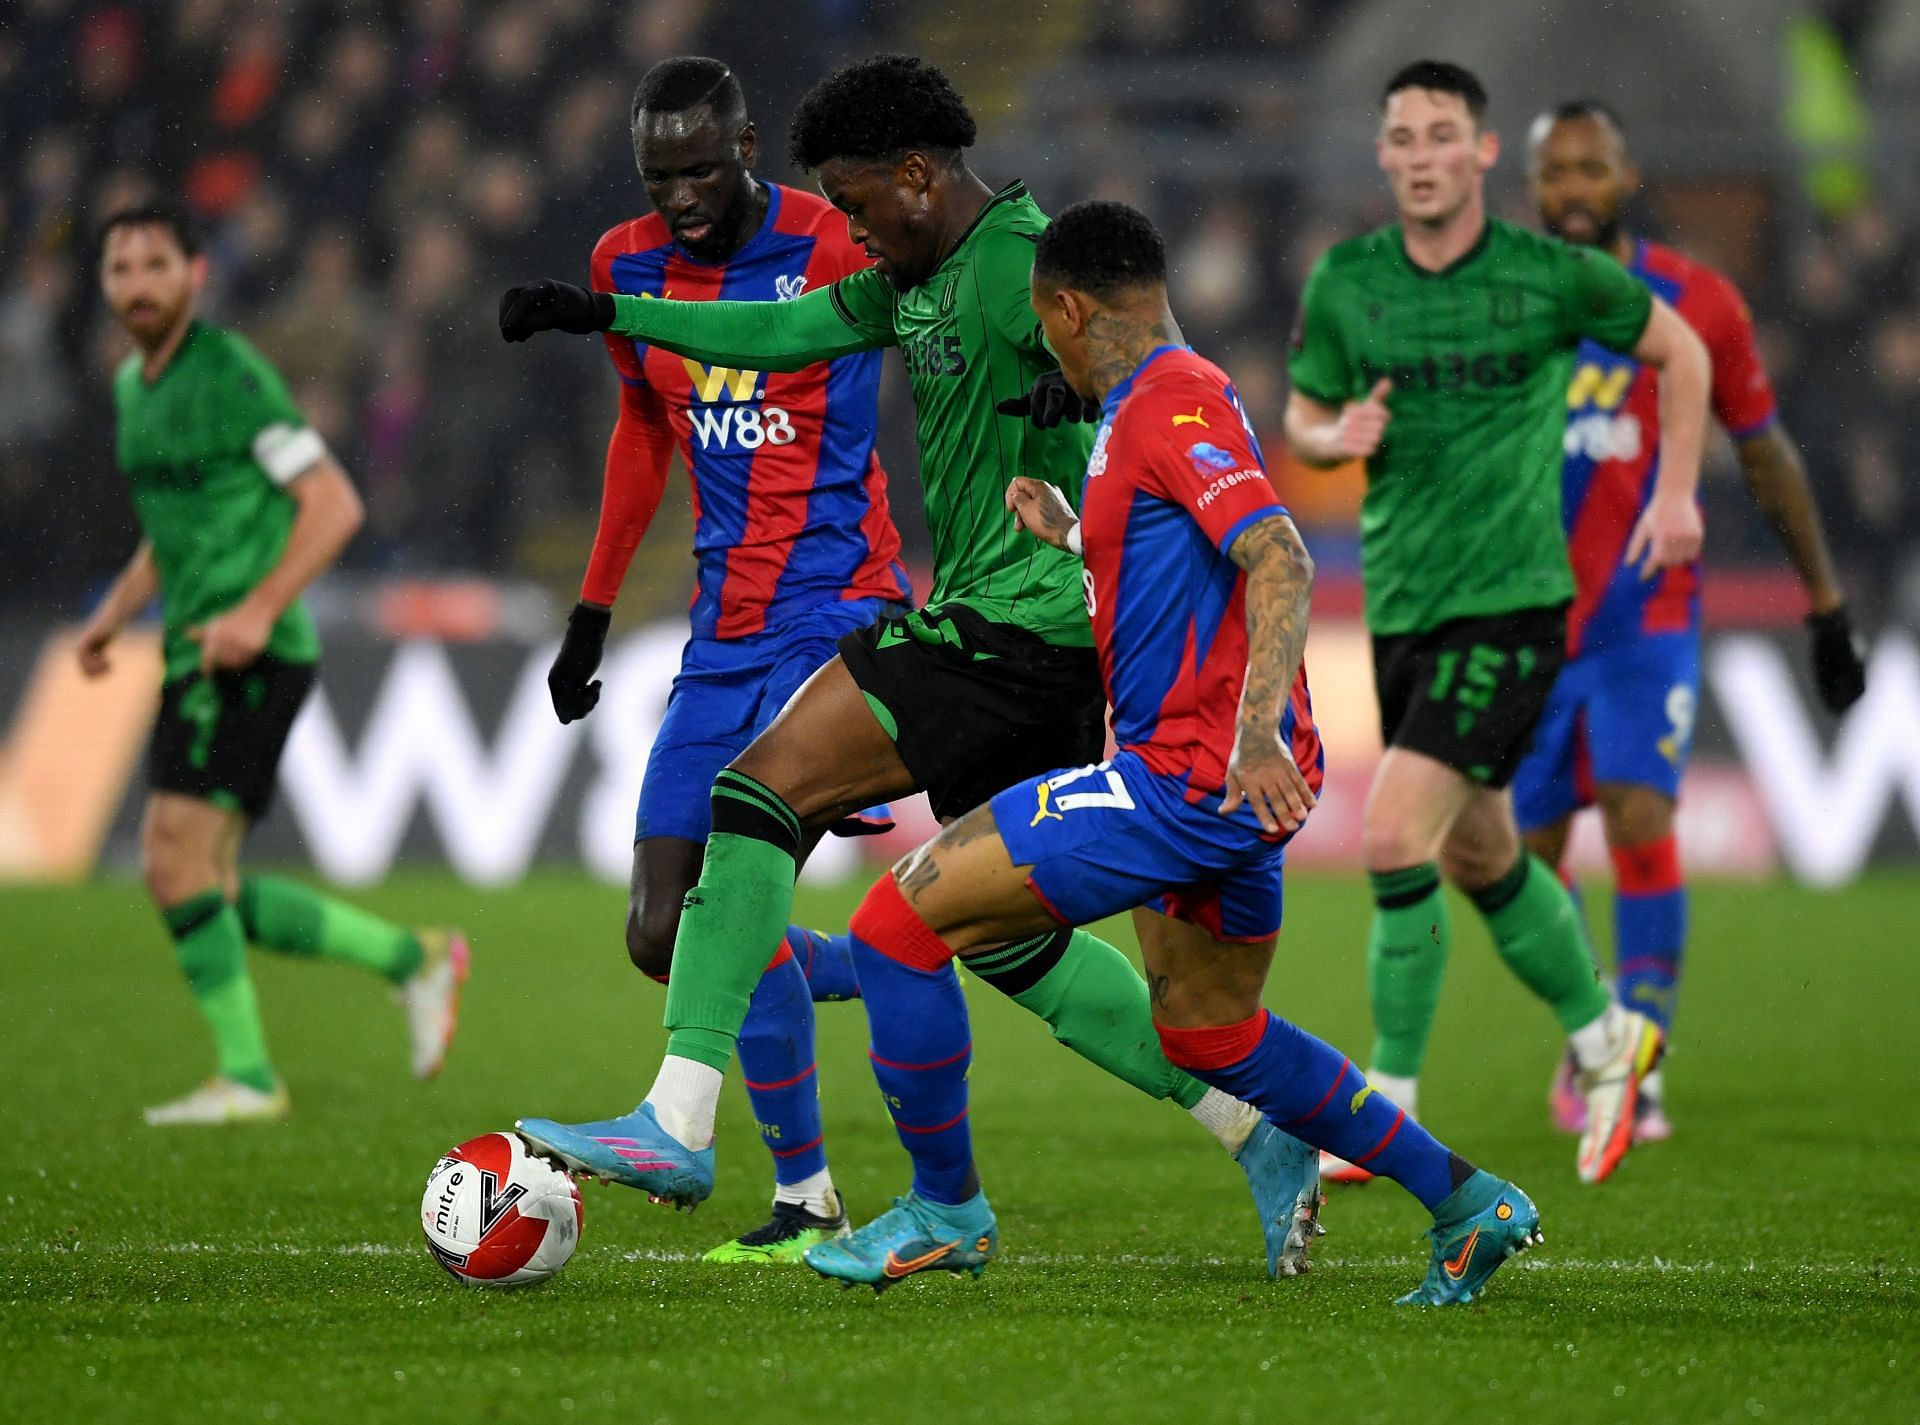 Crystal Palace v Stoke City: The Emirates FA Cup Fifth Round